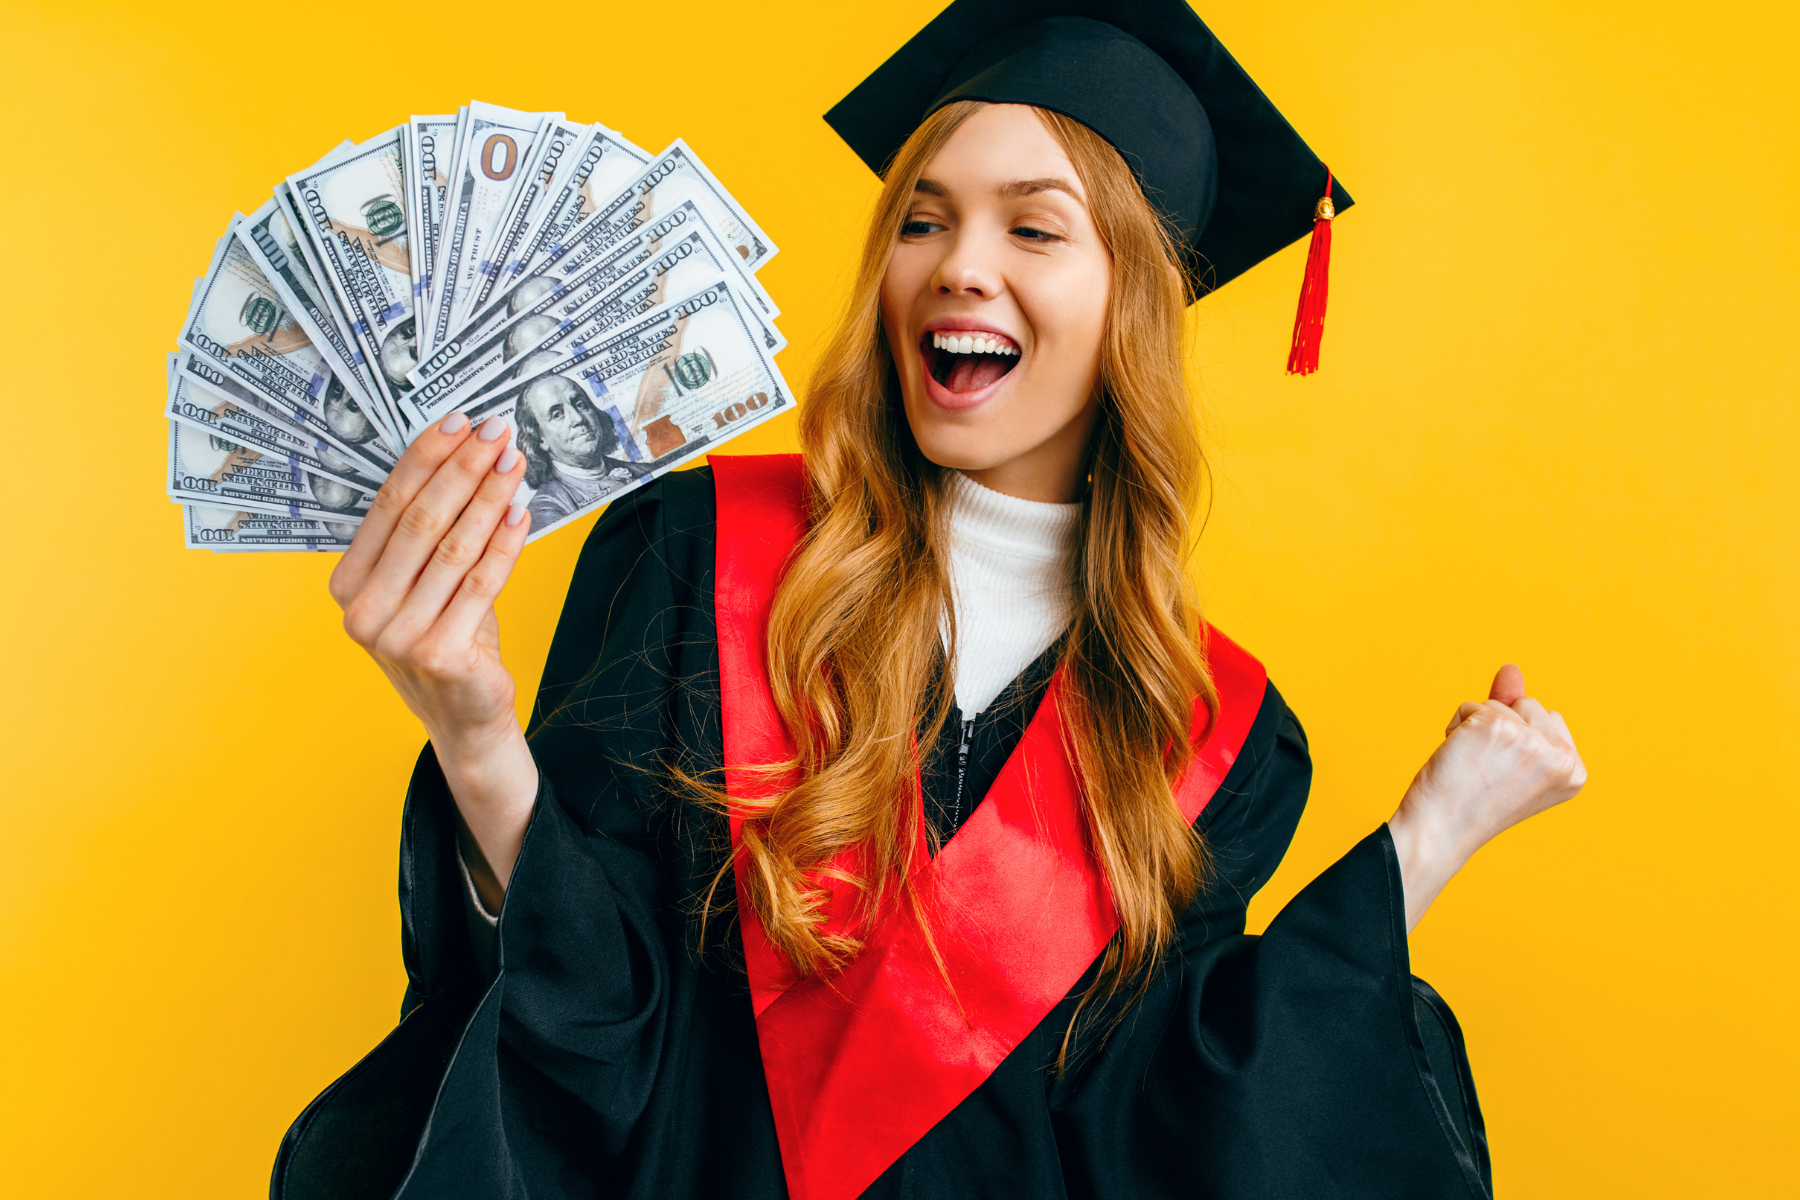 High school student in cap and gown fans out handful of cash